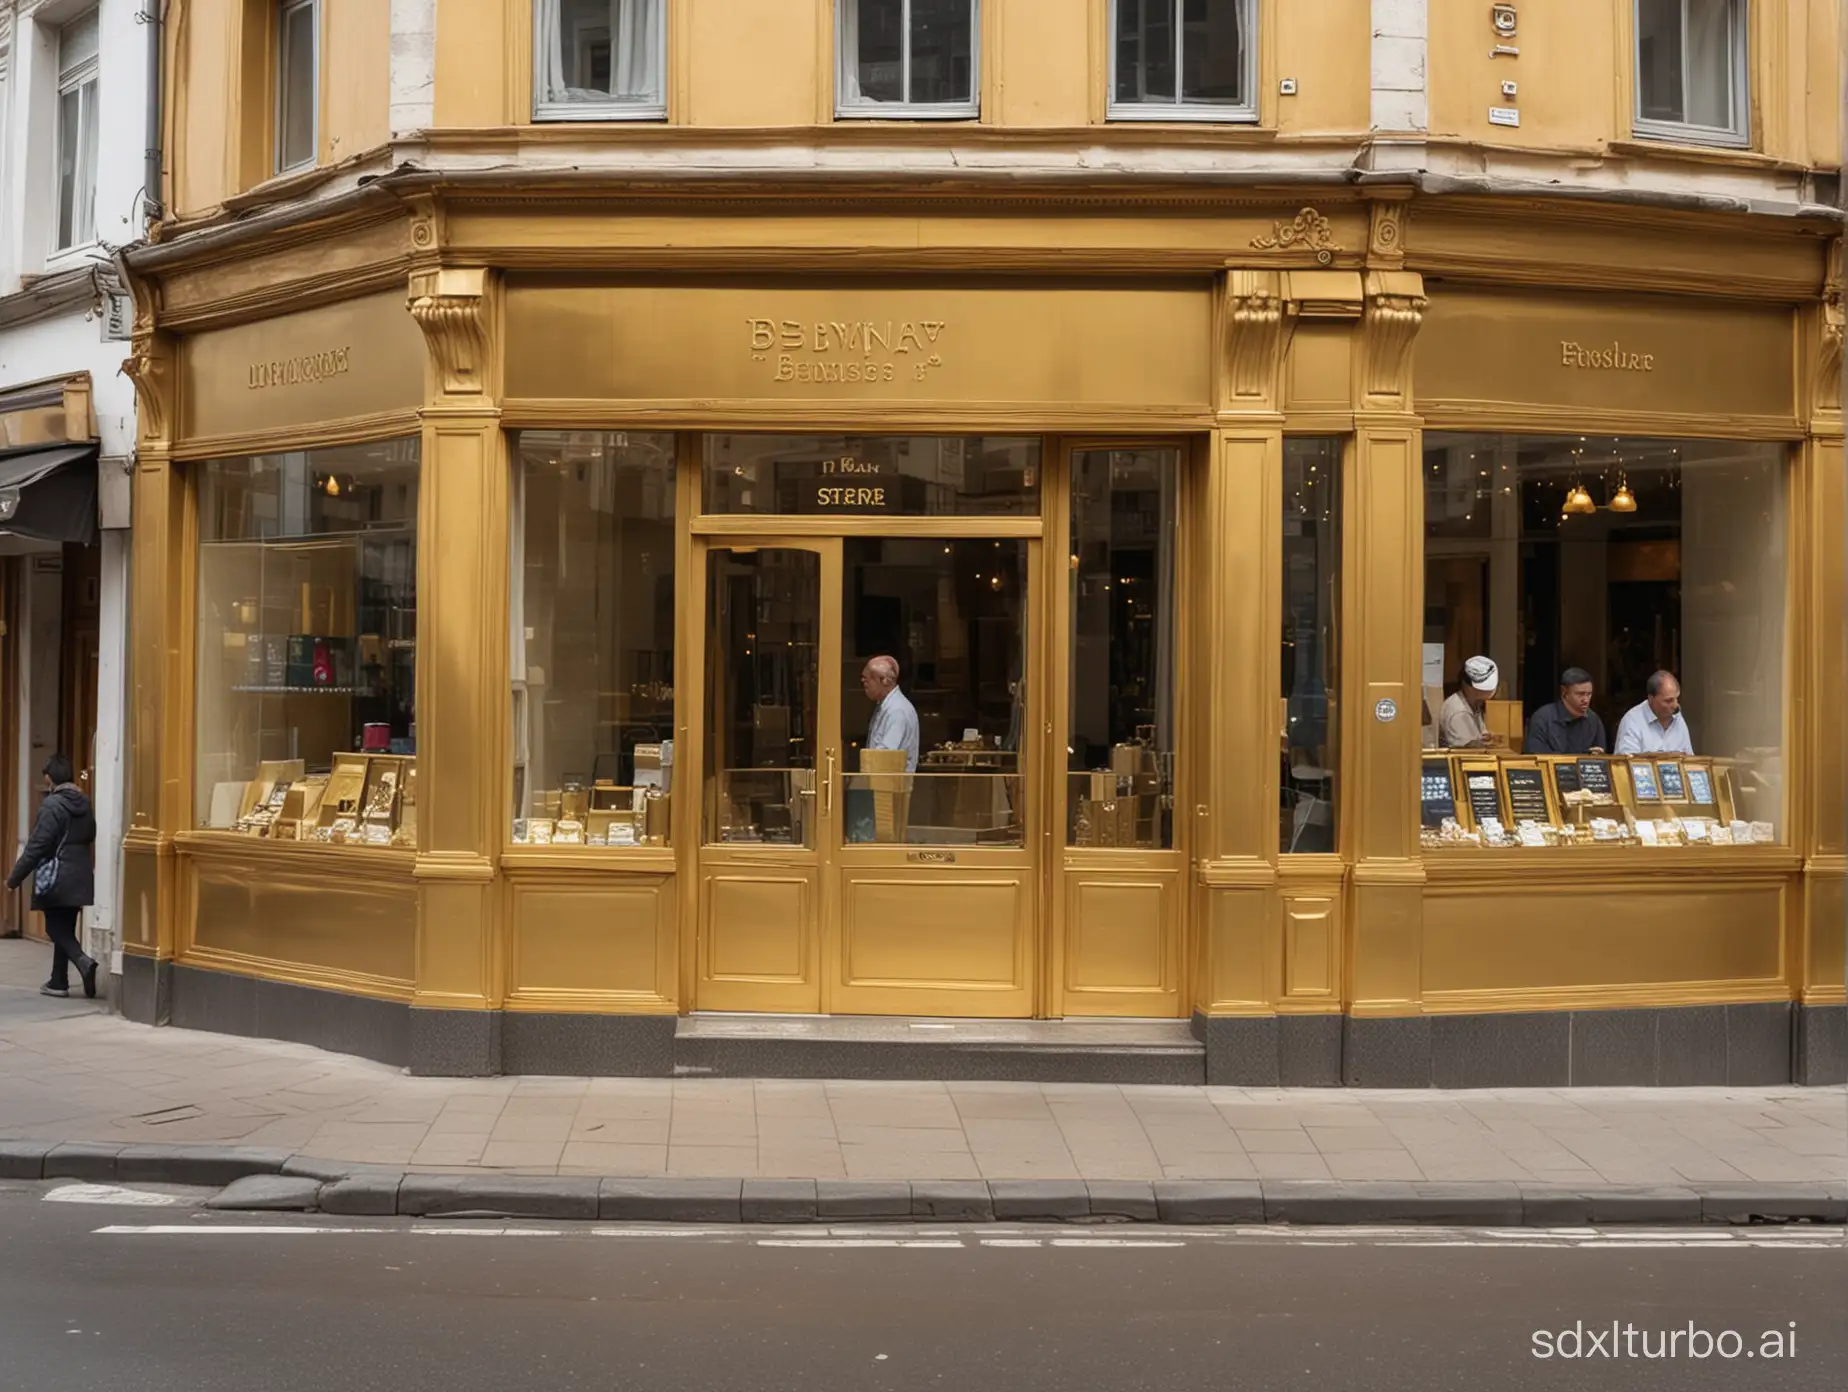 a long street, people walking, a gold store at the corner, closing door, shopkeeper, packing, high quality